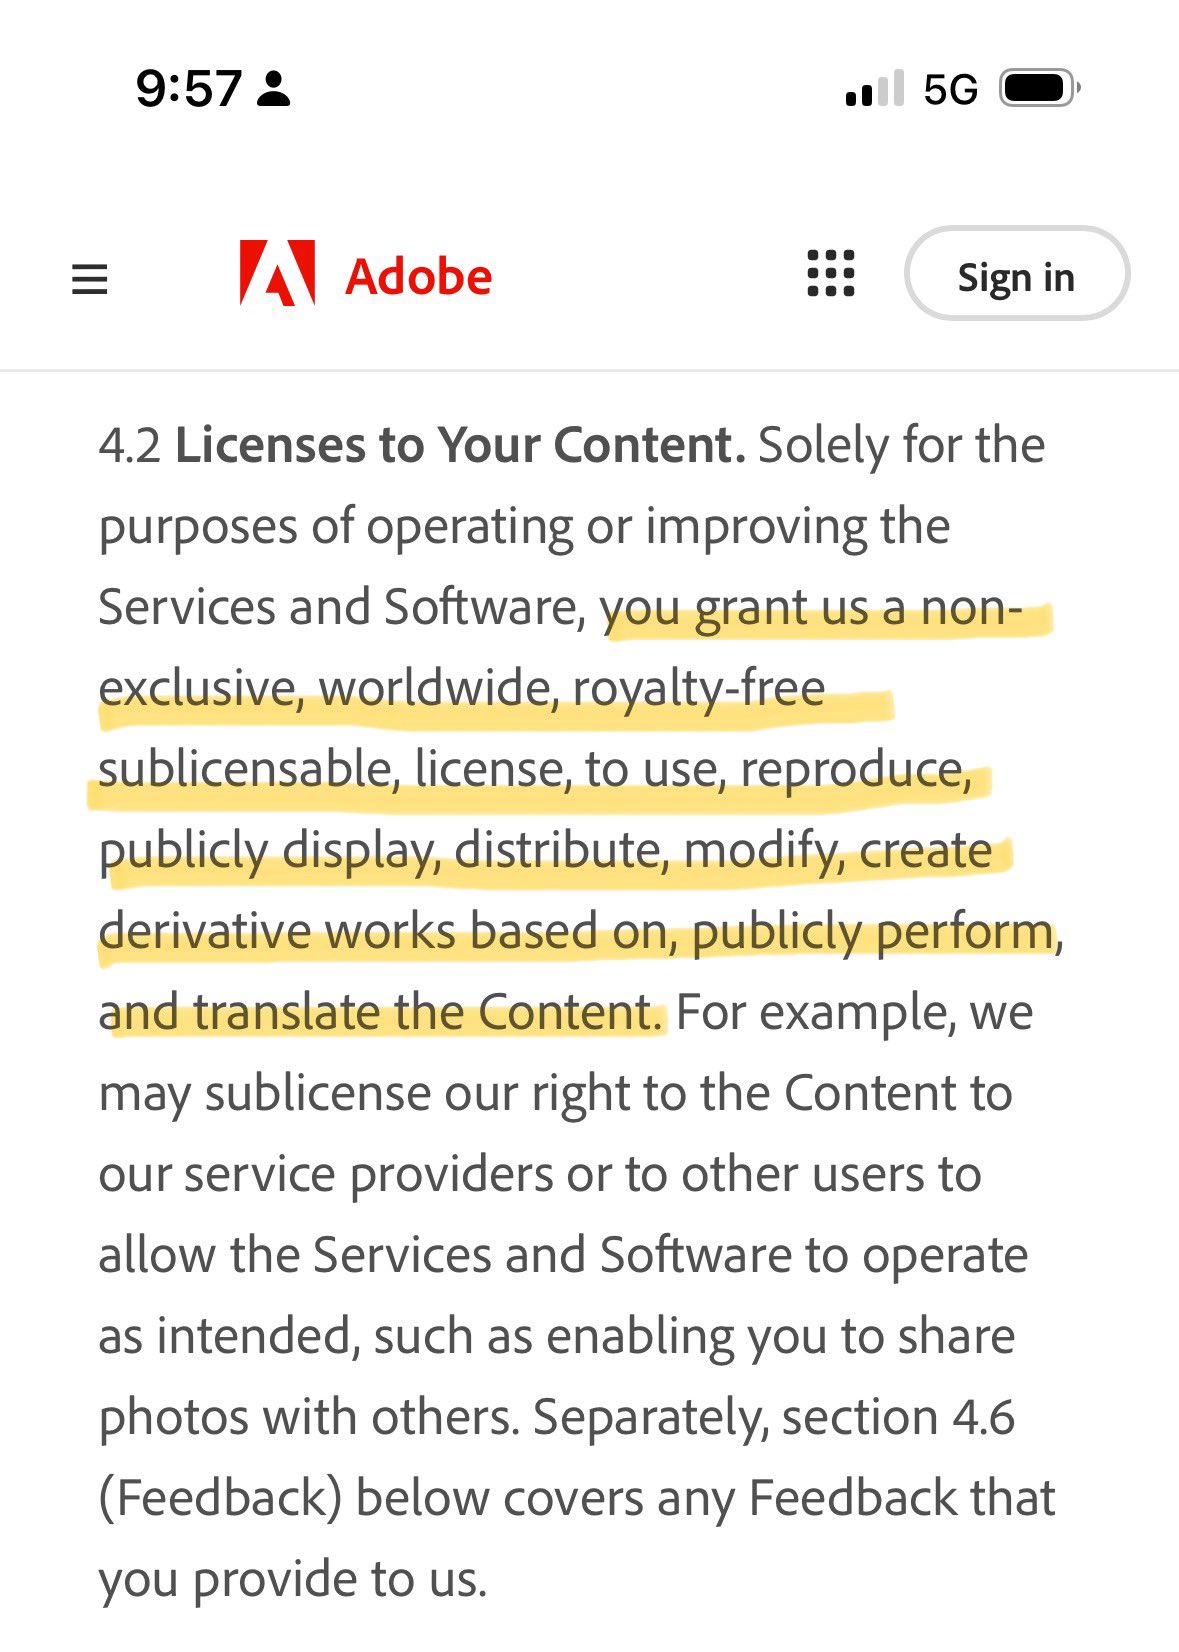 Adobe's Terms of Use